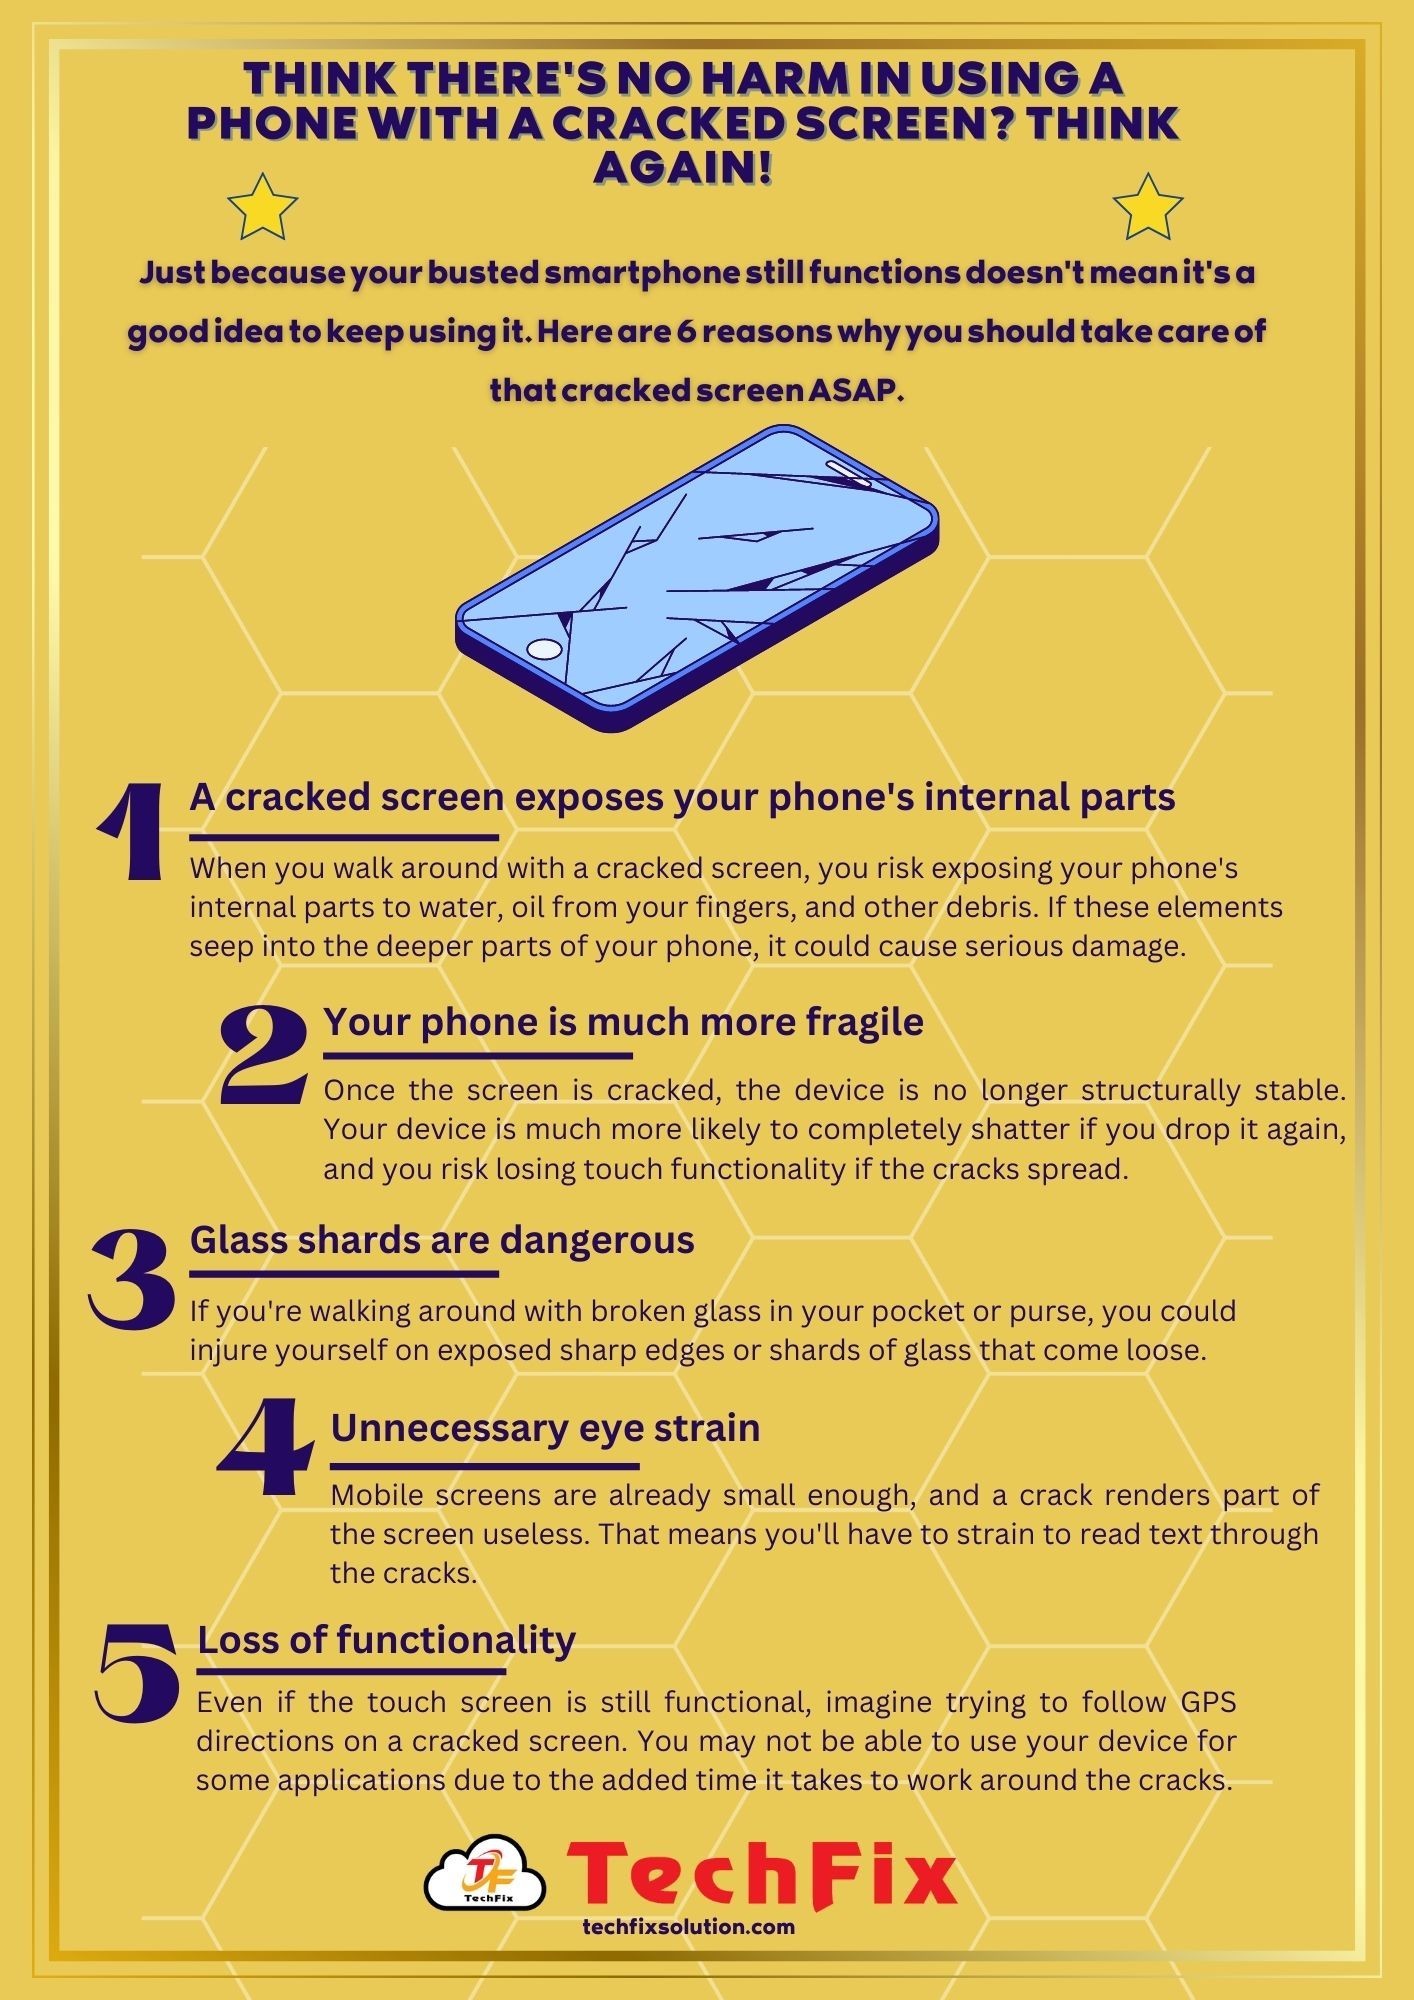 THINK THERE'S NO HARM USING A PHONE WITH A CRACKED SCREEN? THINK AGAIN